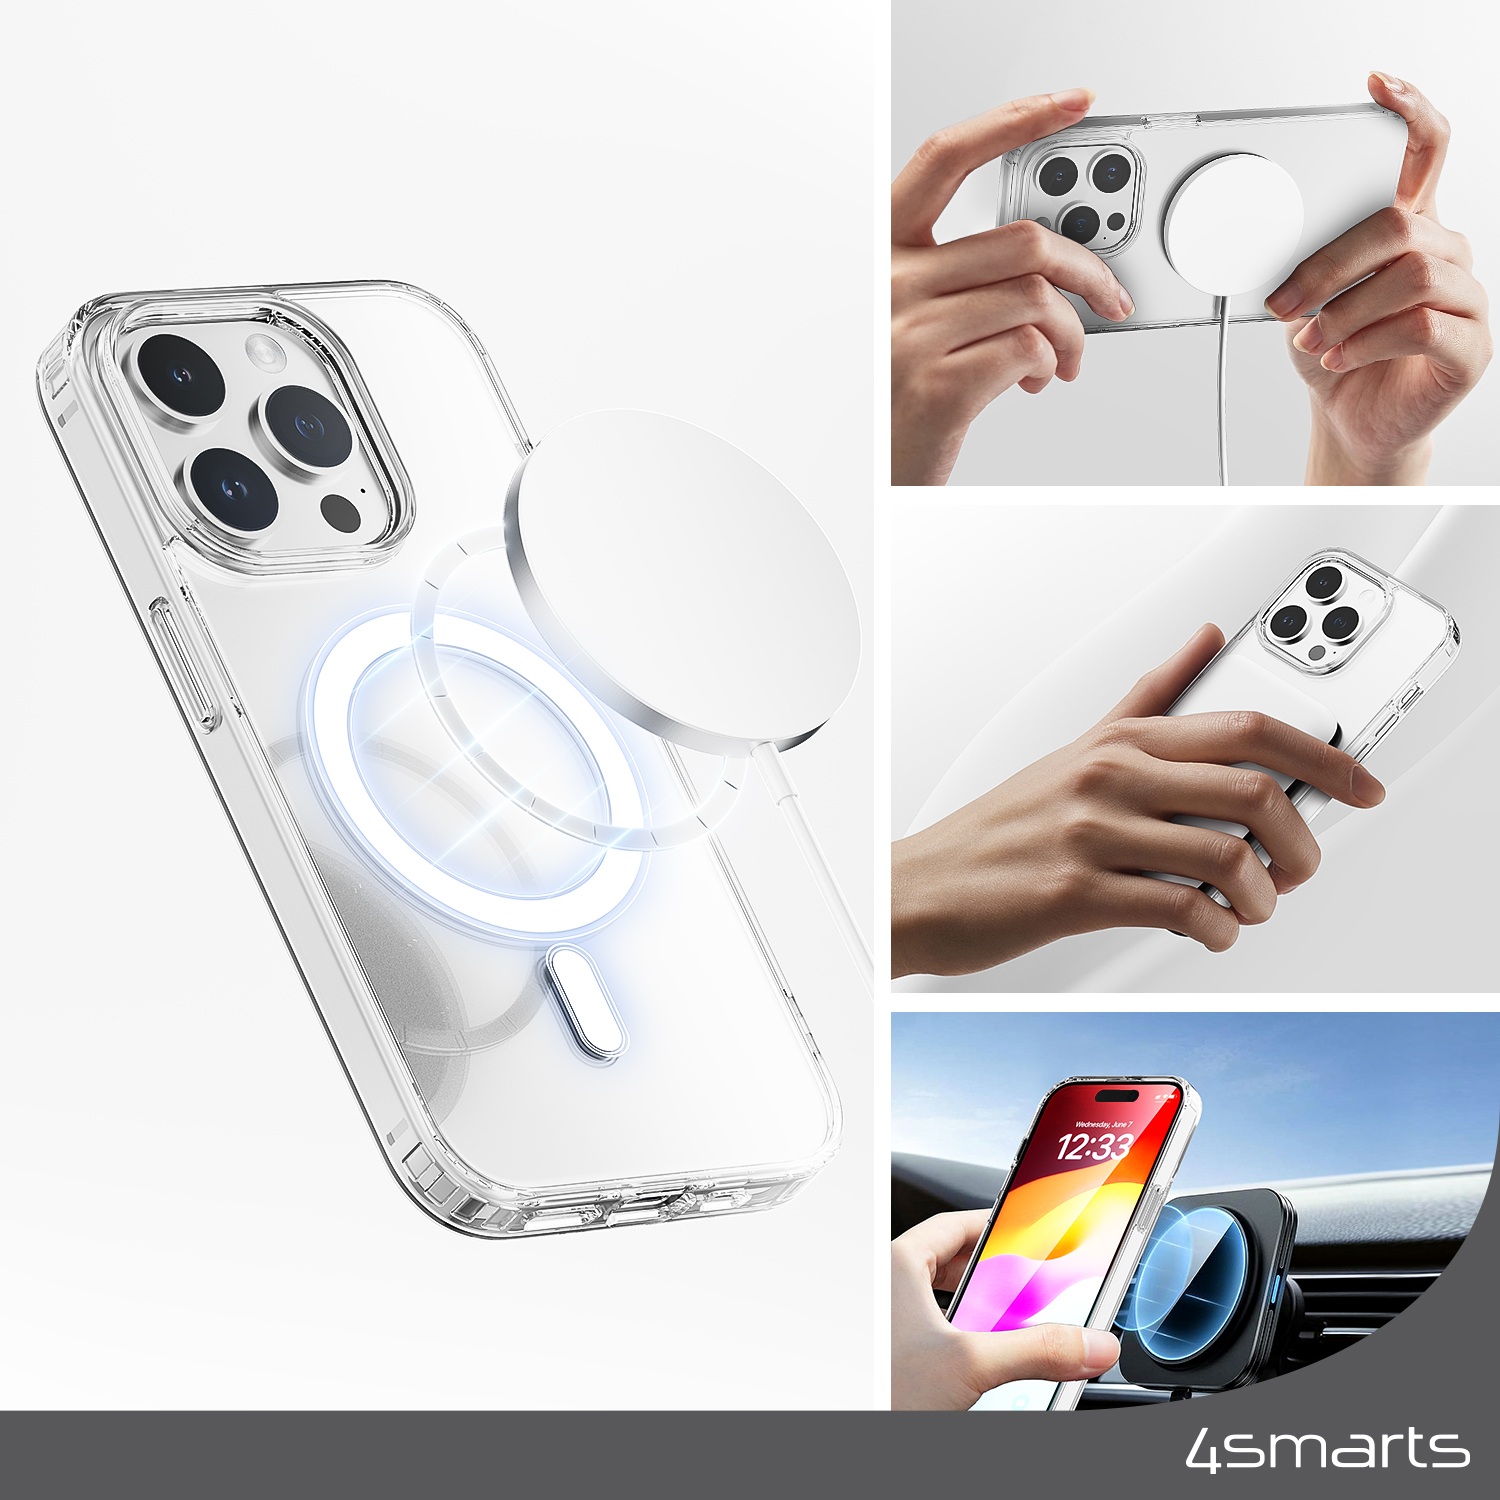 The 4smarts 3in1 Premium Starter Set for Apple iPhone 15 includes a MagSafe-compatible phone case with ideally aligned, integrated magnets that fit perfectly to the smartphone for effortless attachment and faster wireless charging.